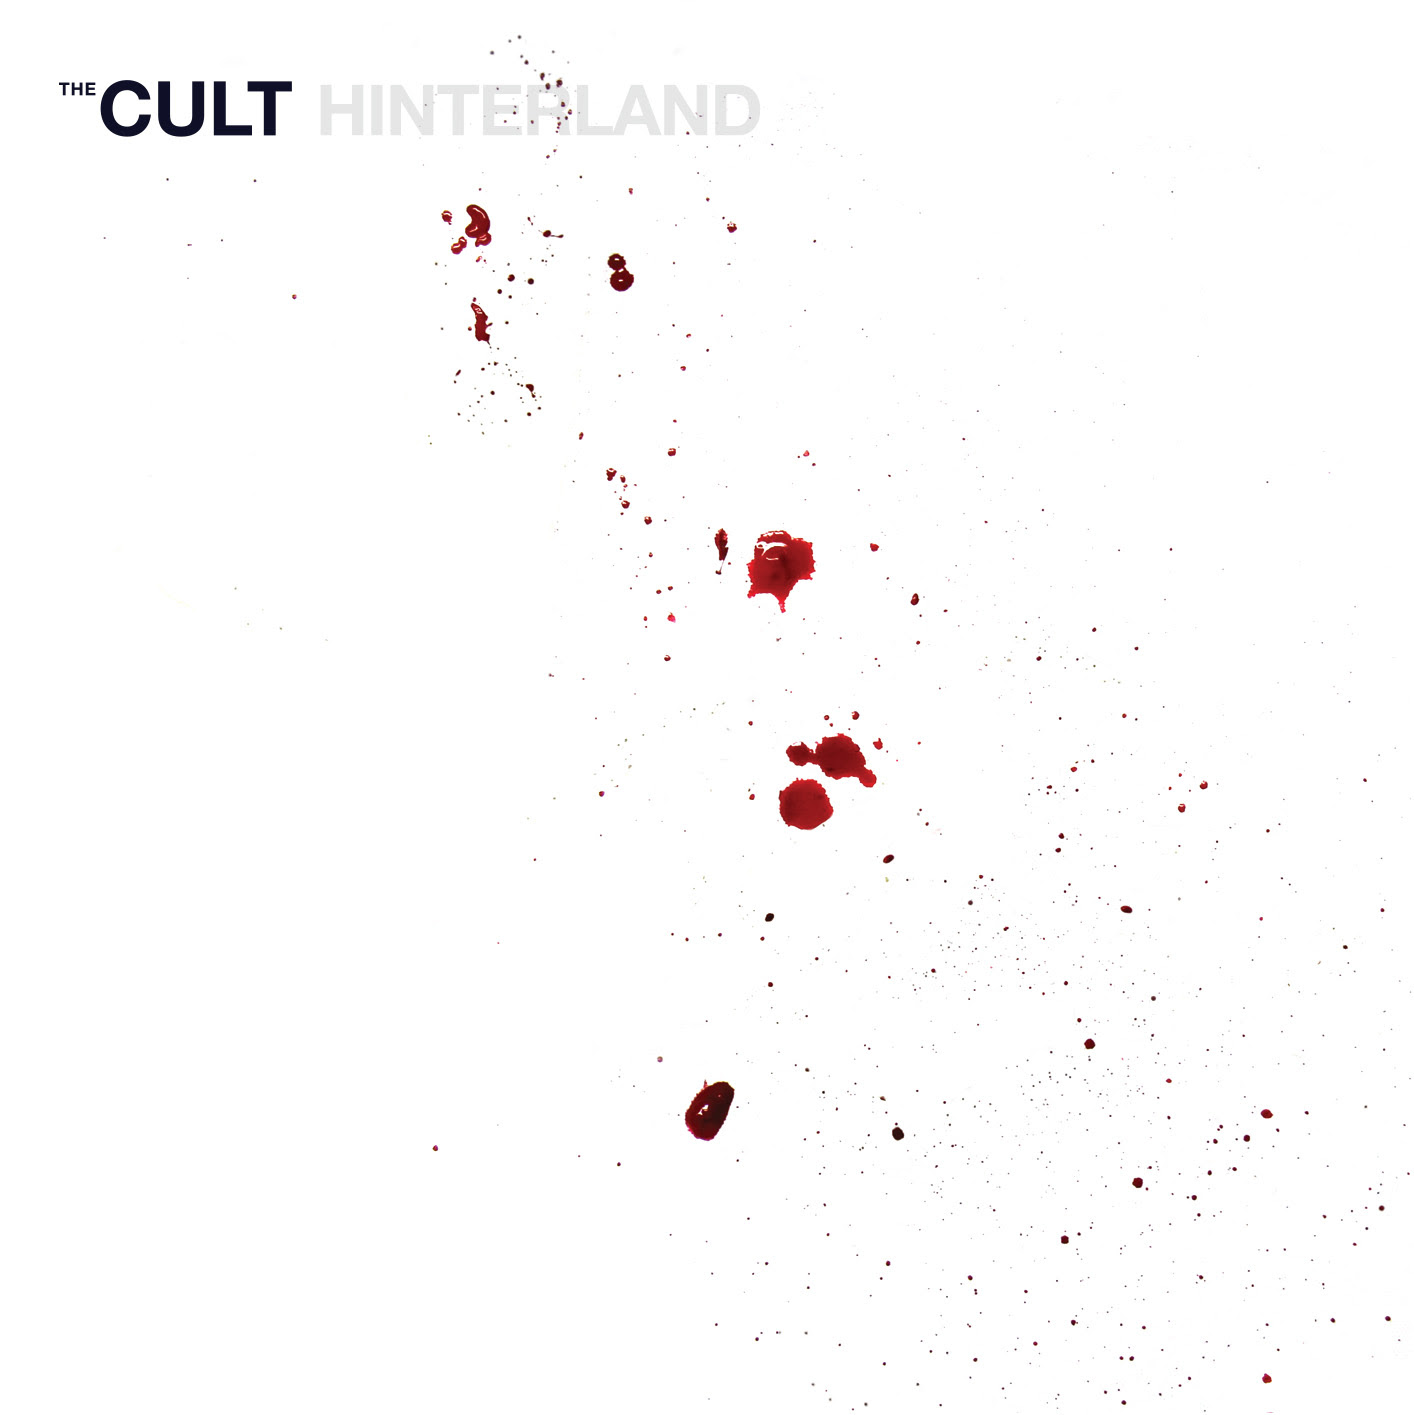 The Cult 1